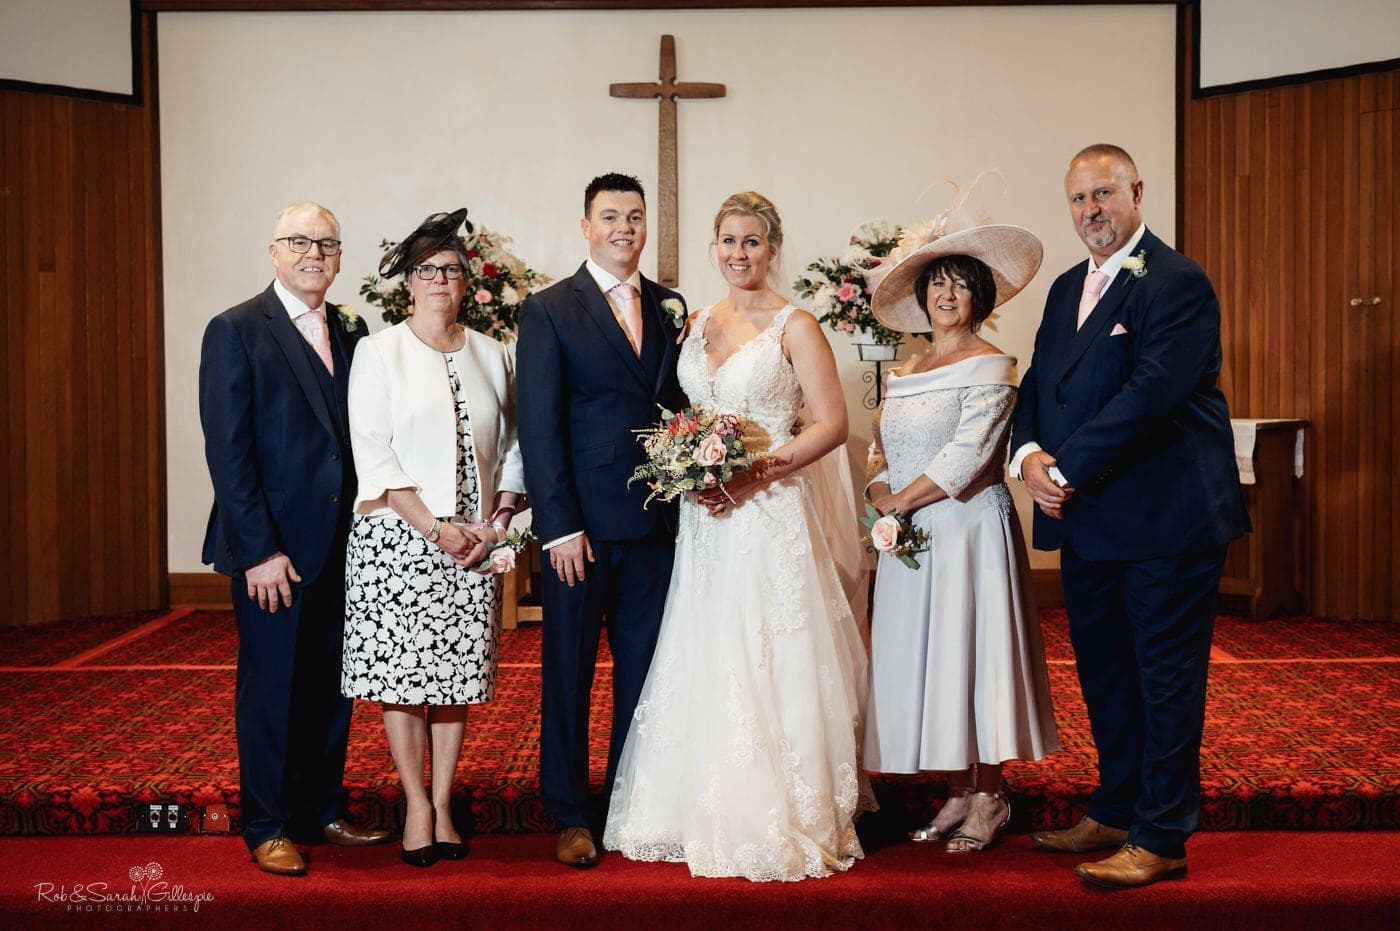 Small wedding group photo in church